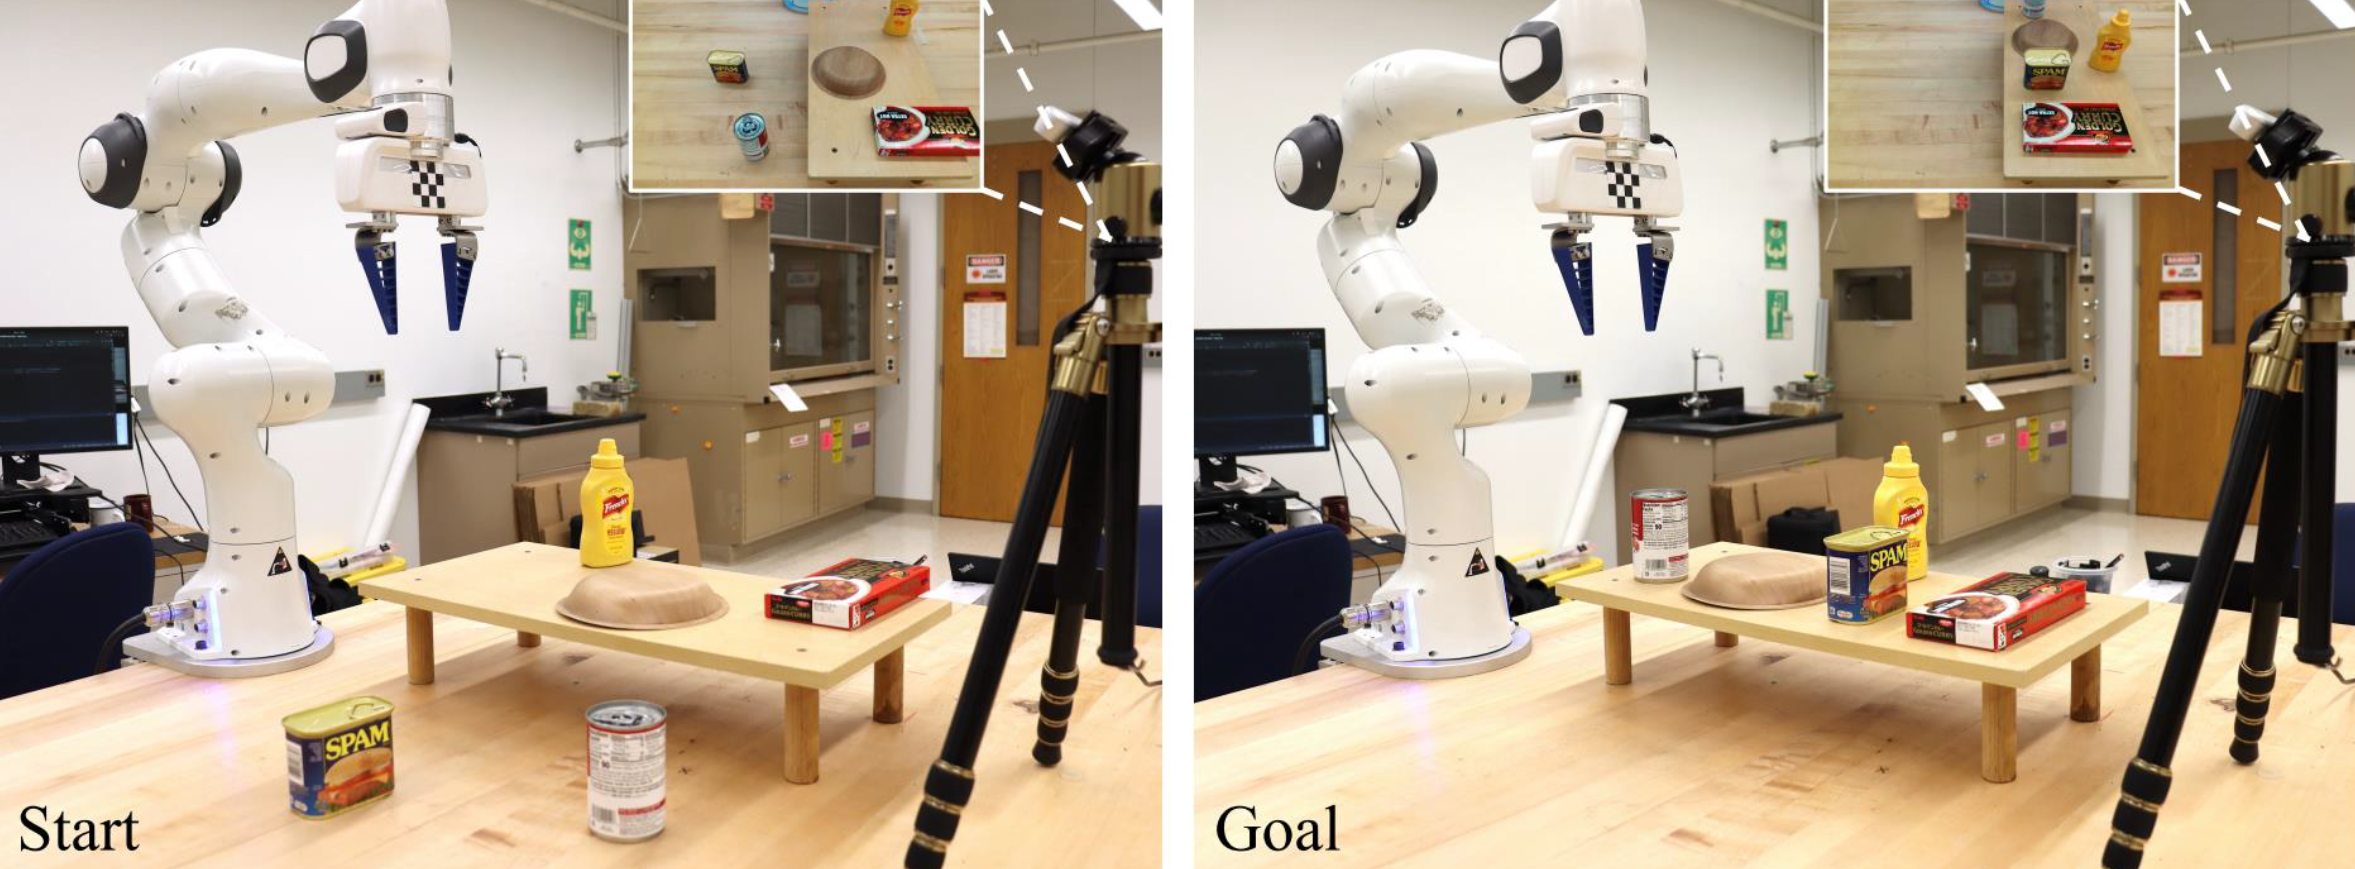 photo of robot arm with objects, one photo showing "before" and the other "after" sorting